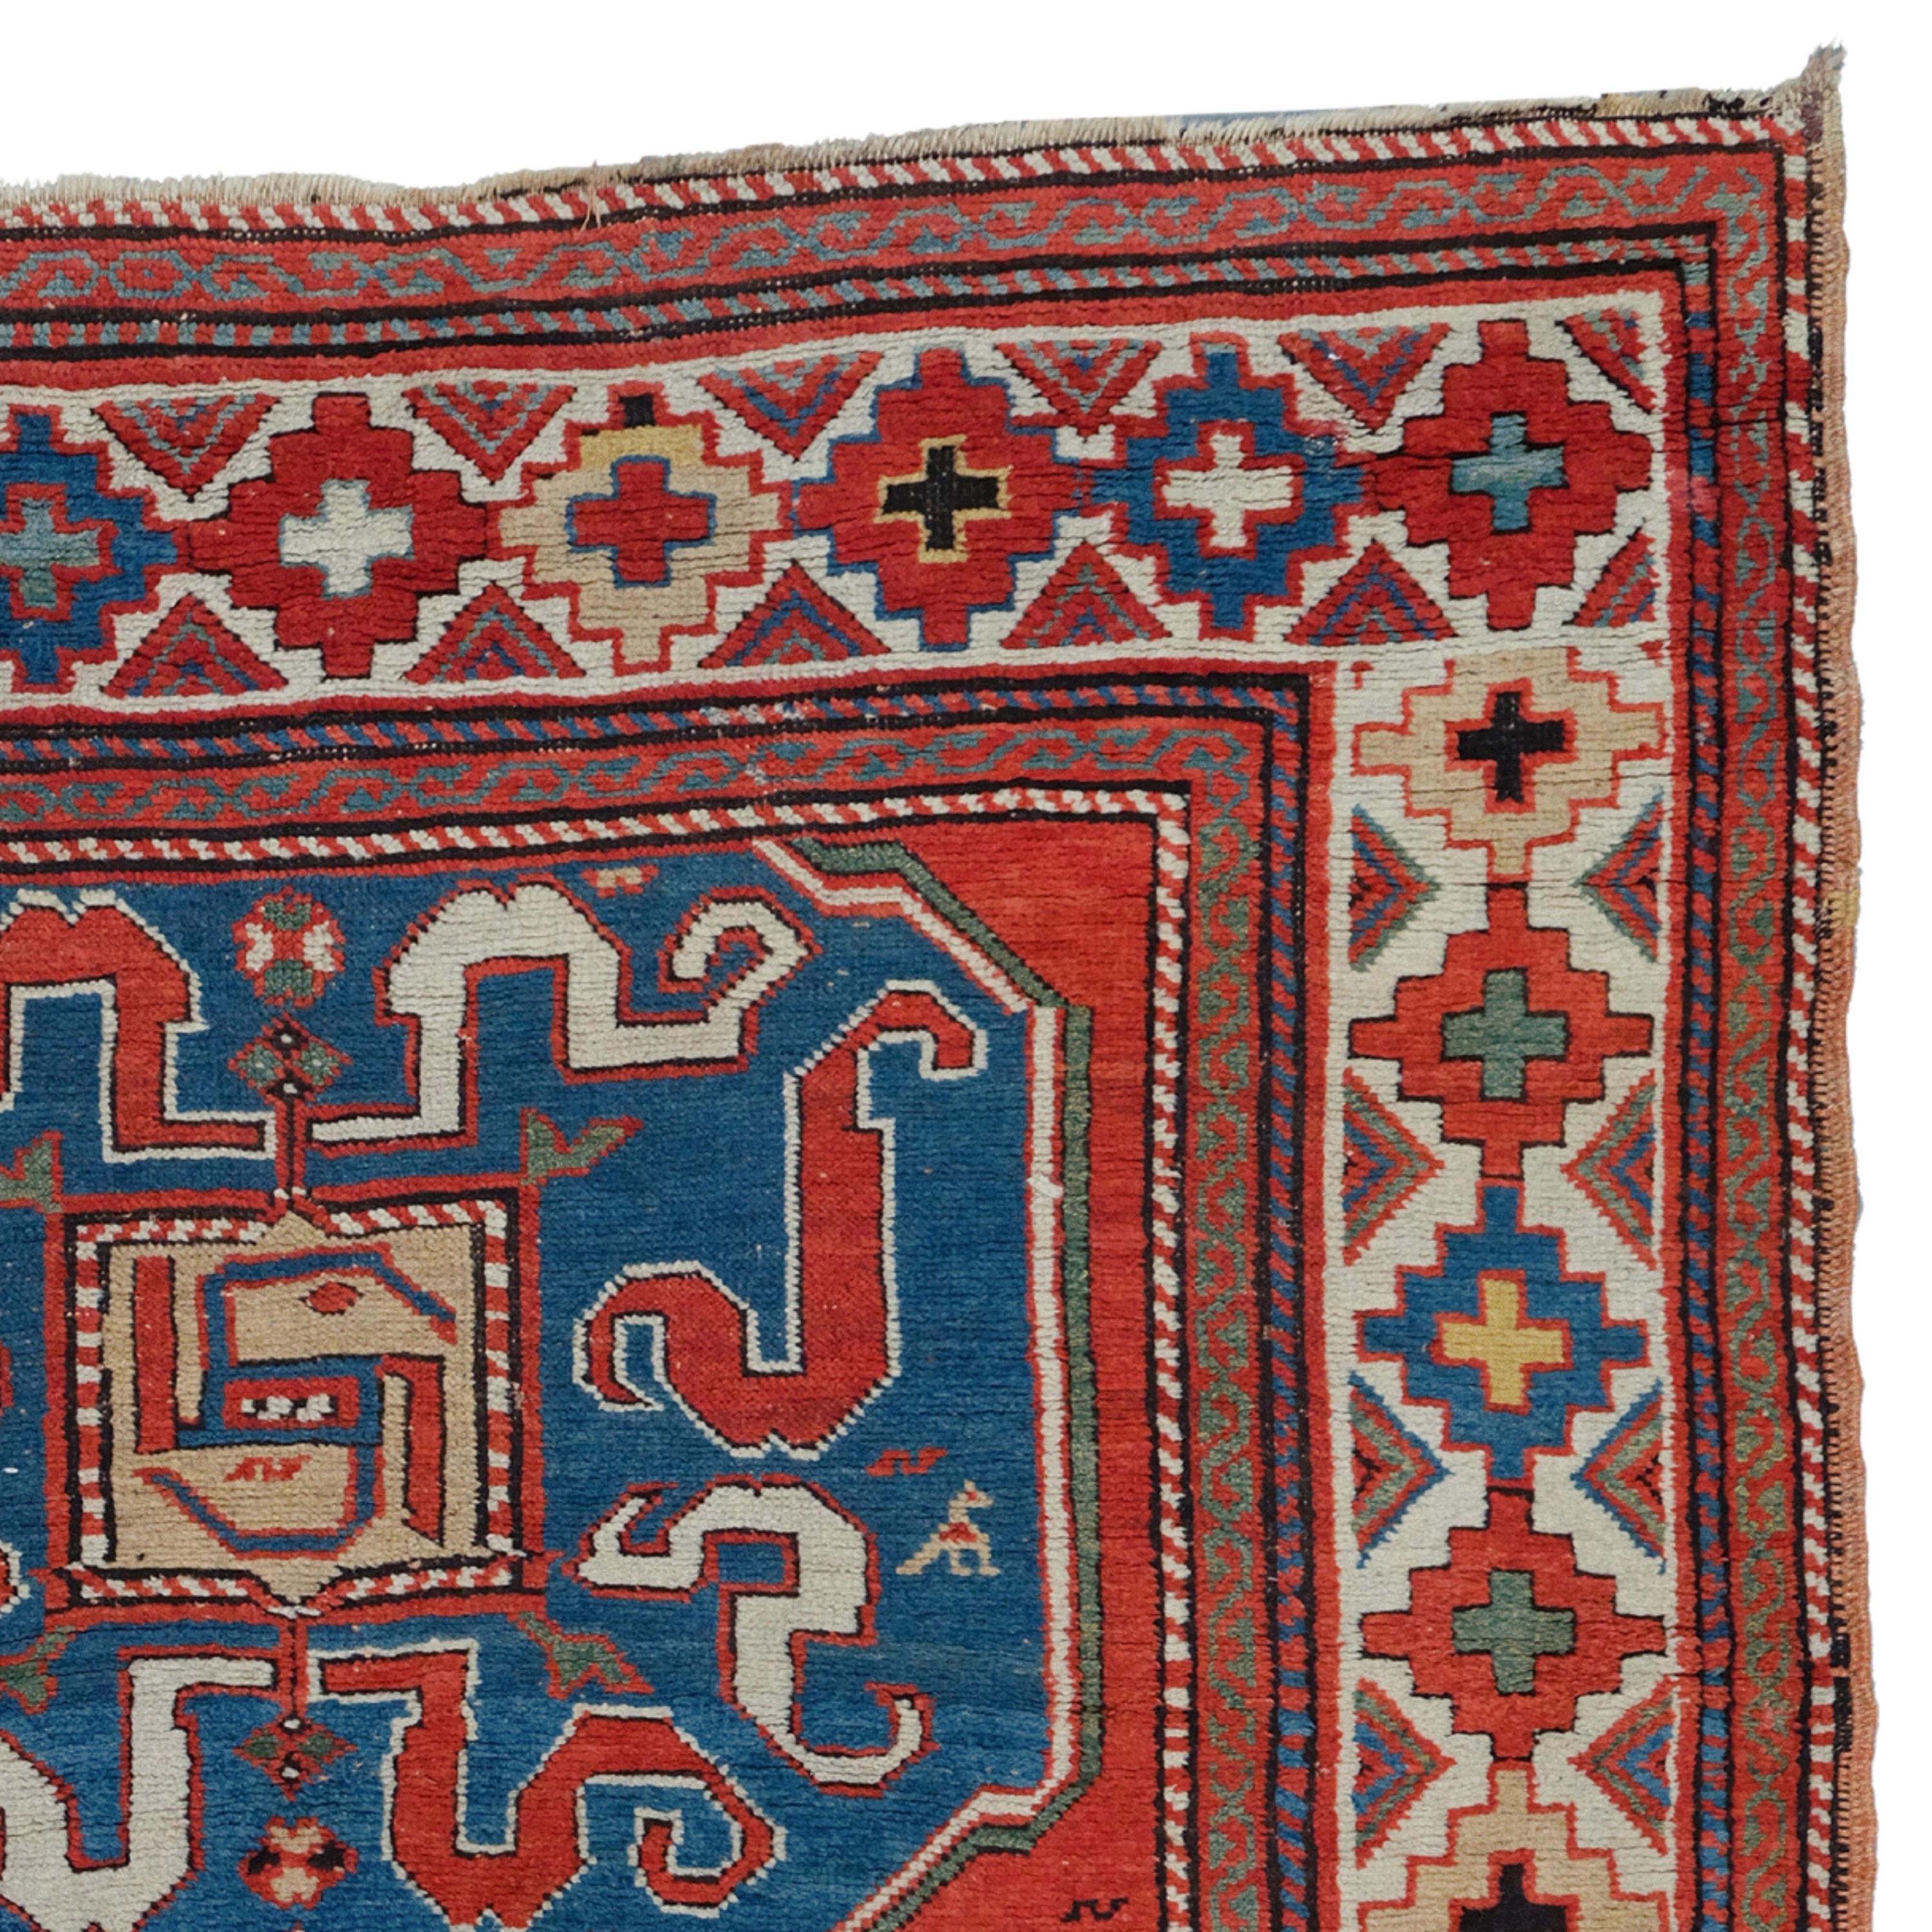 Antique Cloudband Rug - 19th Century Cloudband Rug, Antique Rug In Good Condition For Sale In Sultanahmet, 34